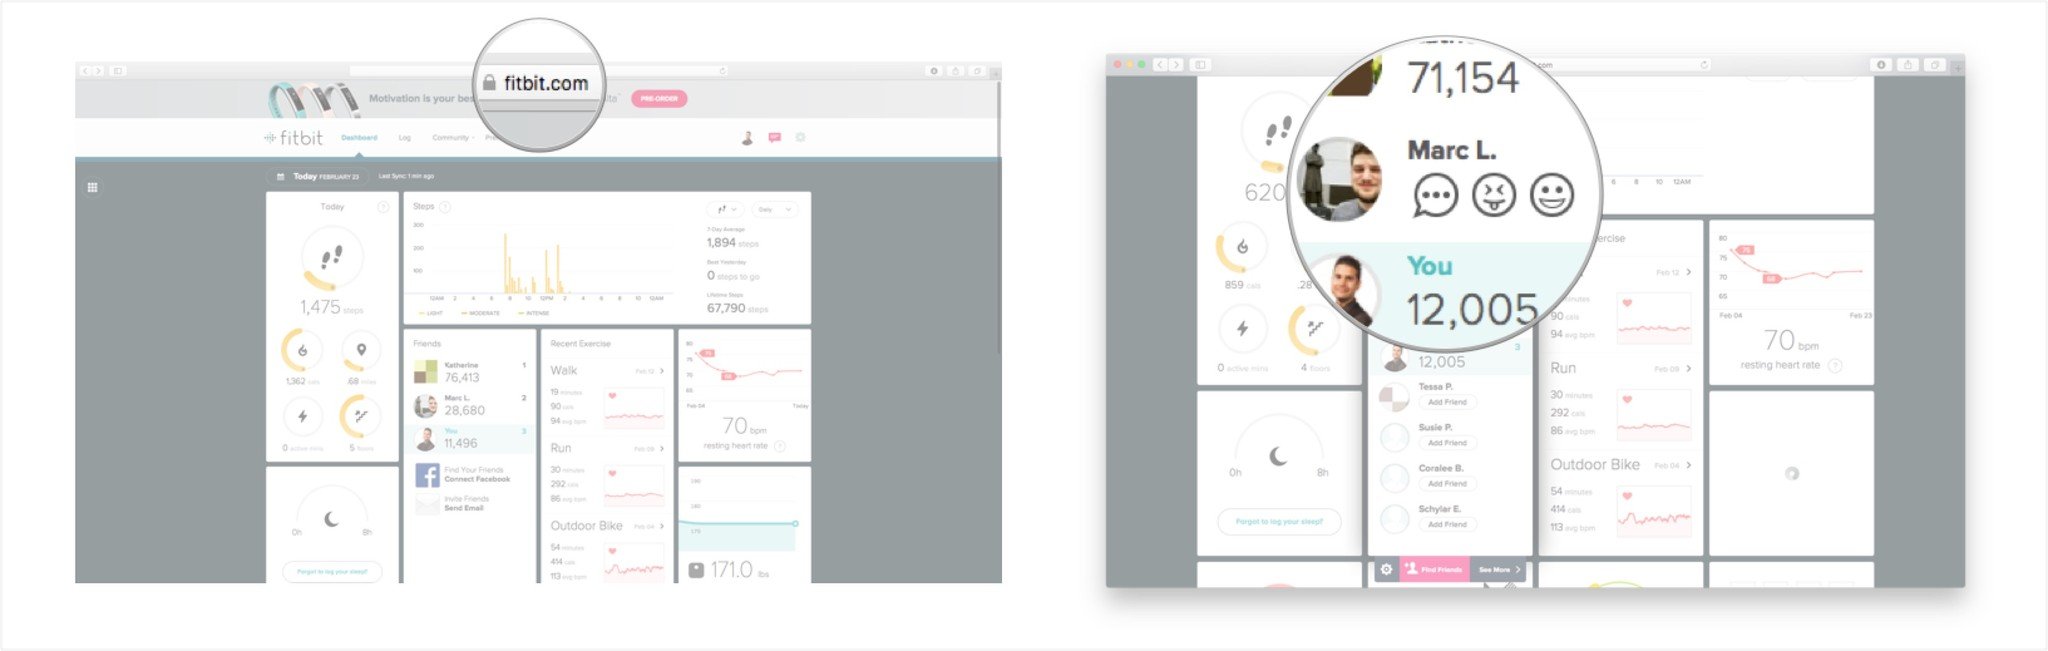 Launch the Fitbit dashboard online and hover your cursor under a friend&#39;s name.